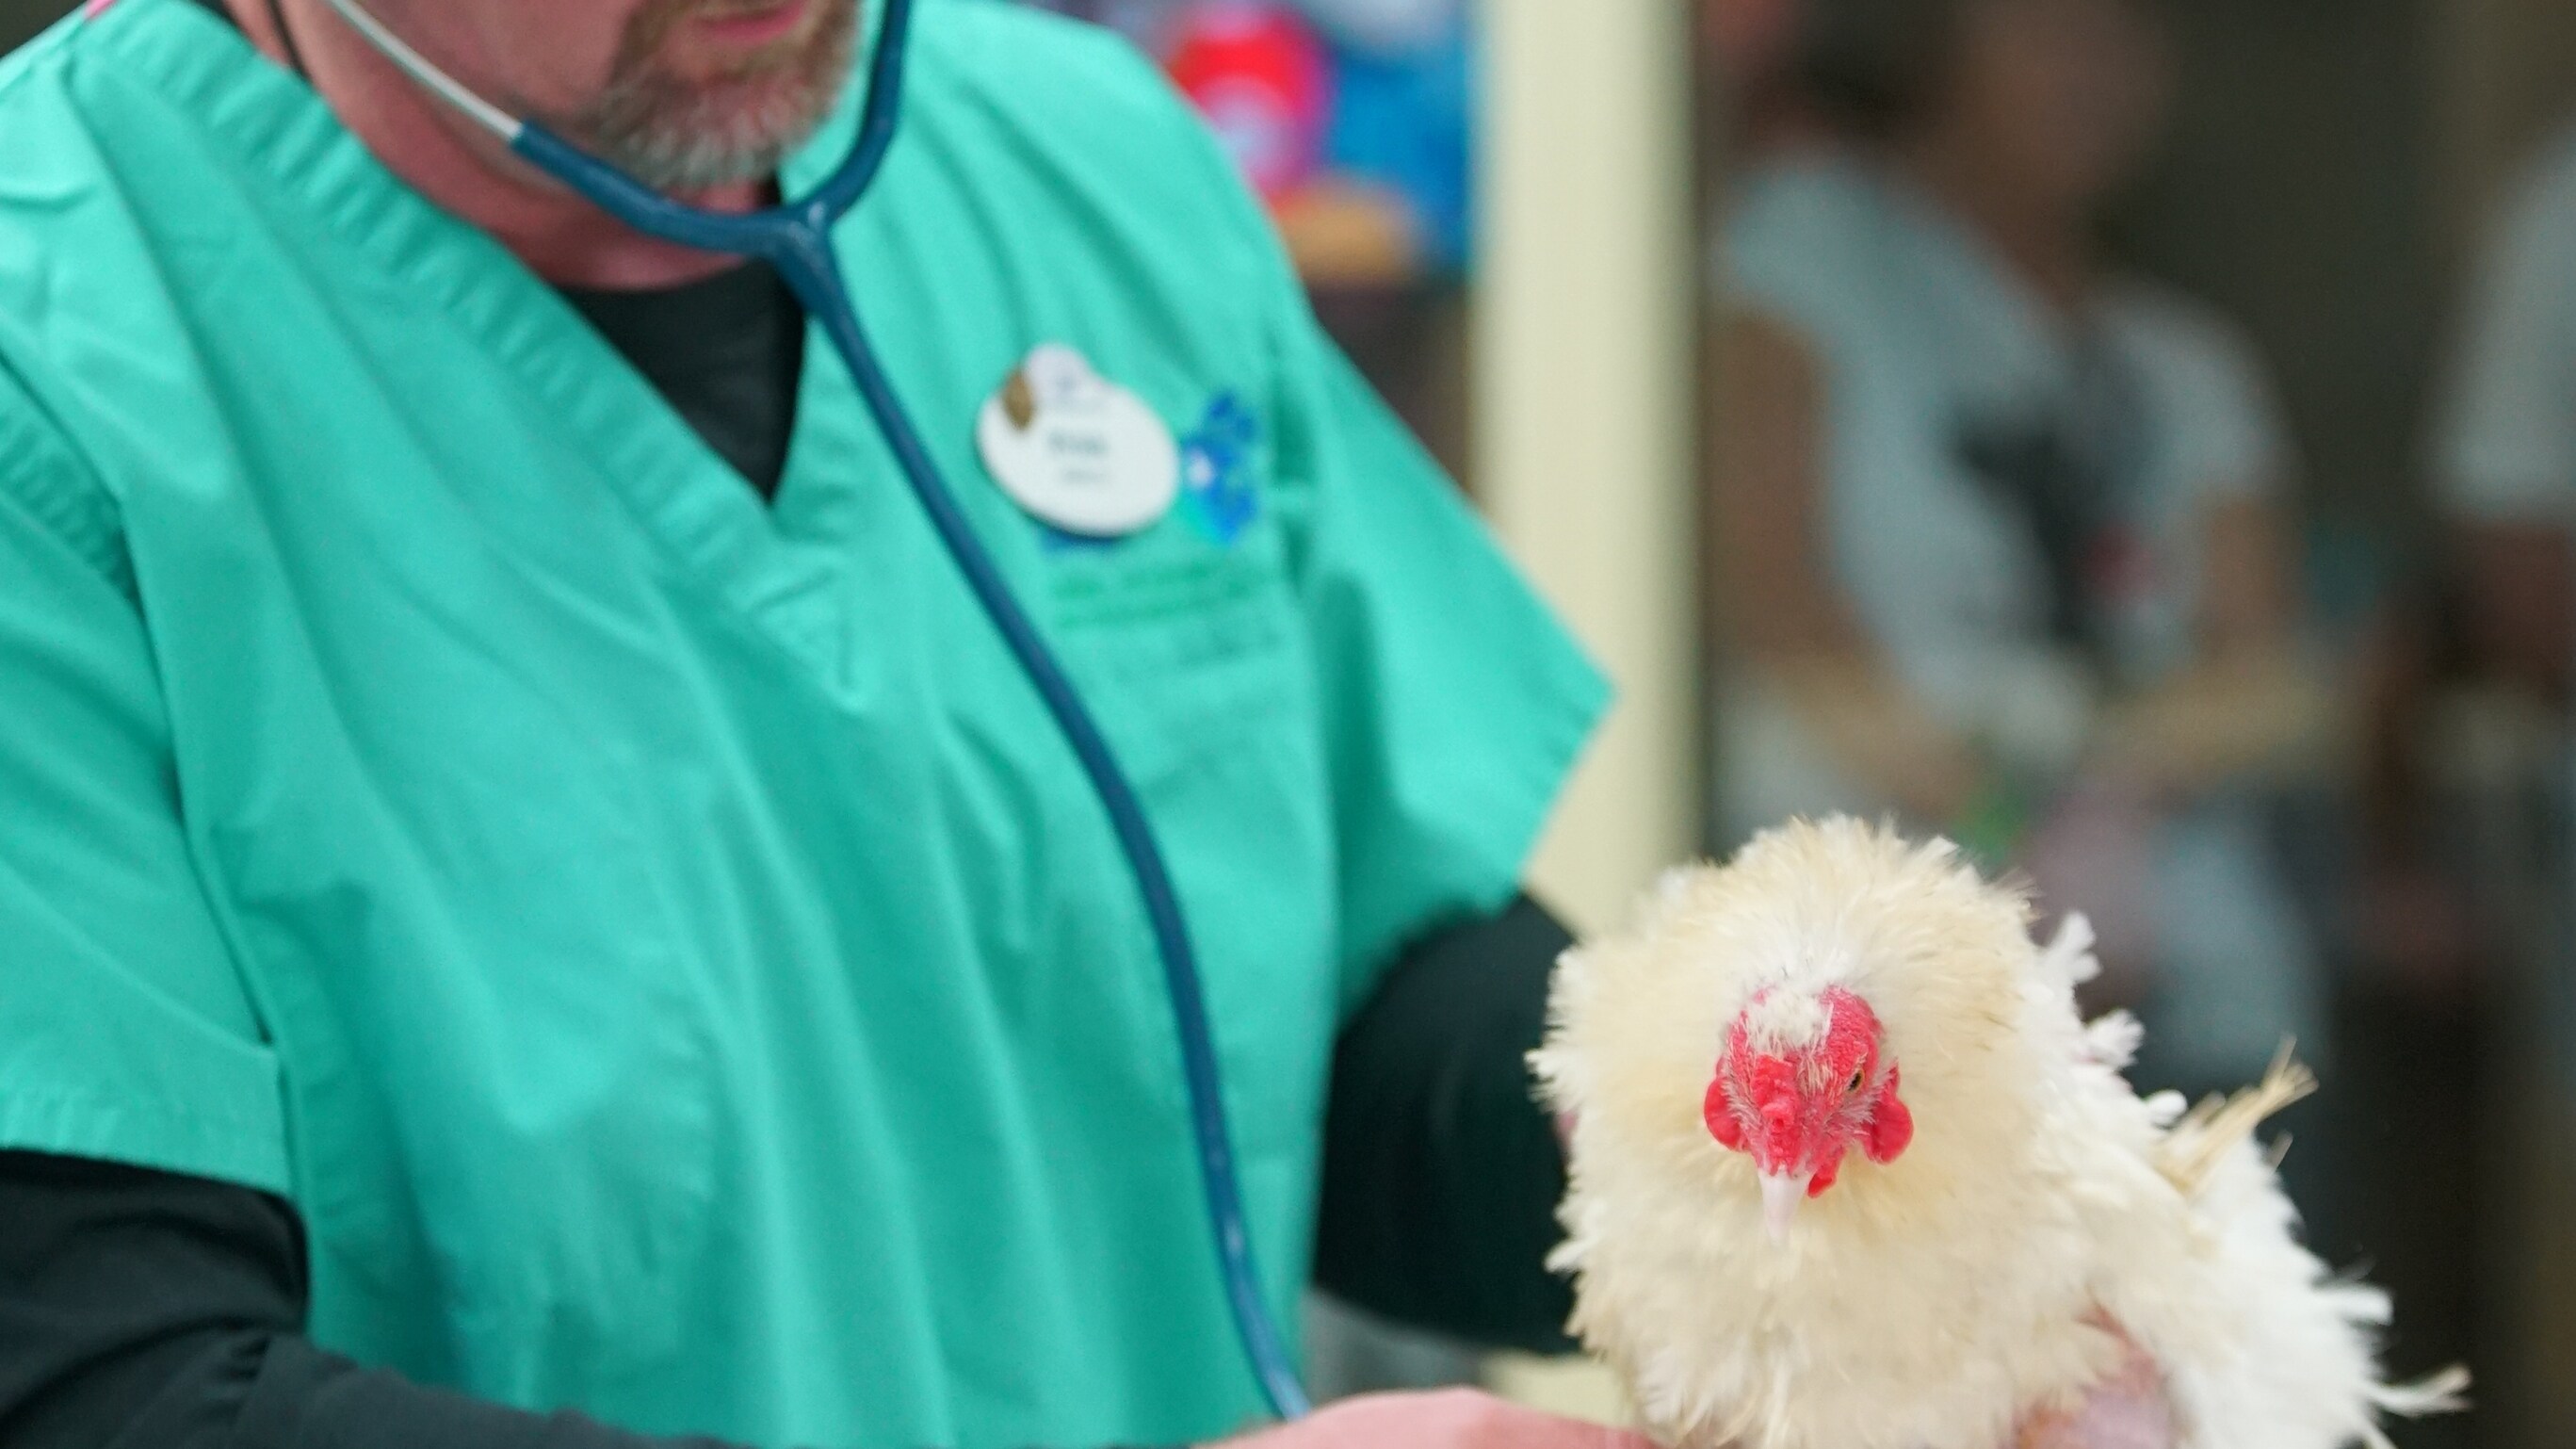 Dr Ryan De Voe performs a checkup on Popcorn, the Frizzle chicken, who recently underwent reproductive surgery. (Disney)